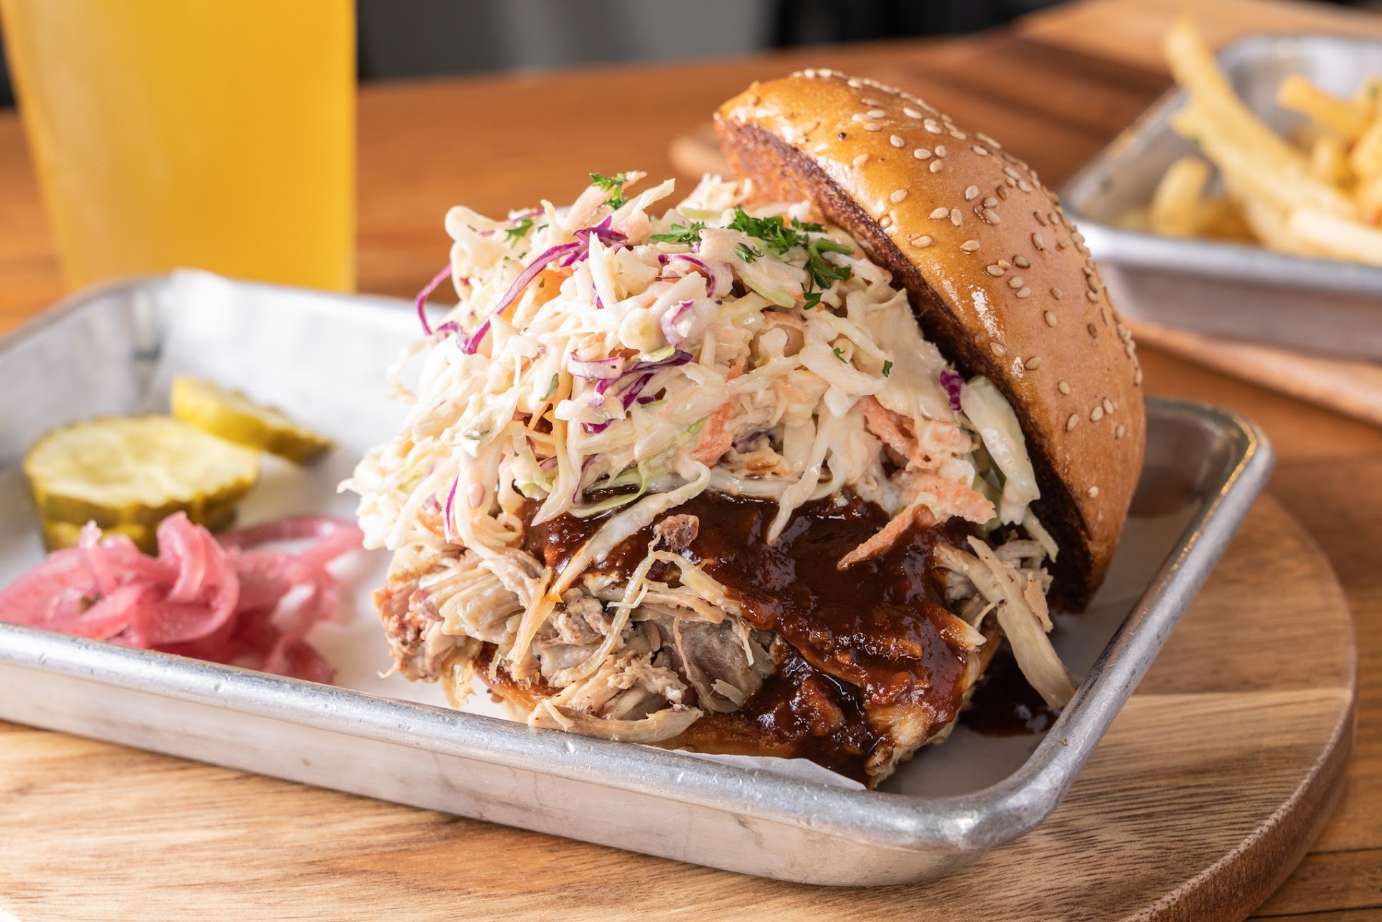 Pulled pork sandwich with coleslaw and BBQ sauce